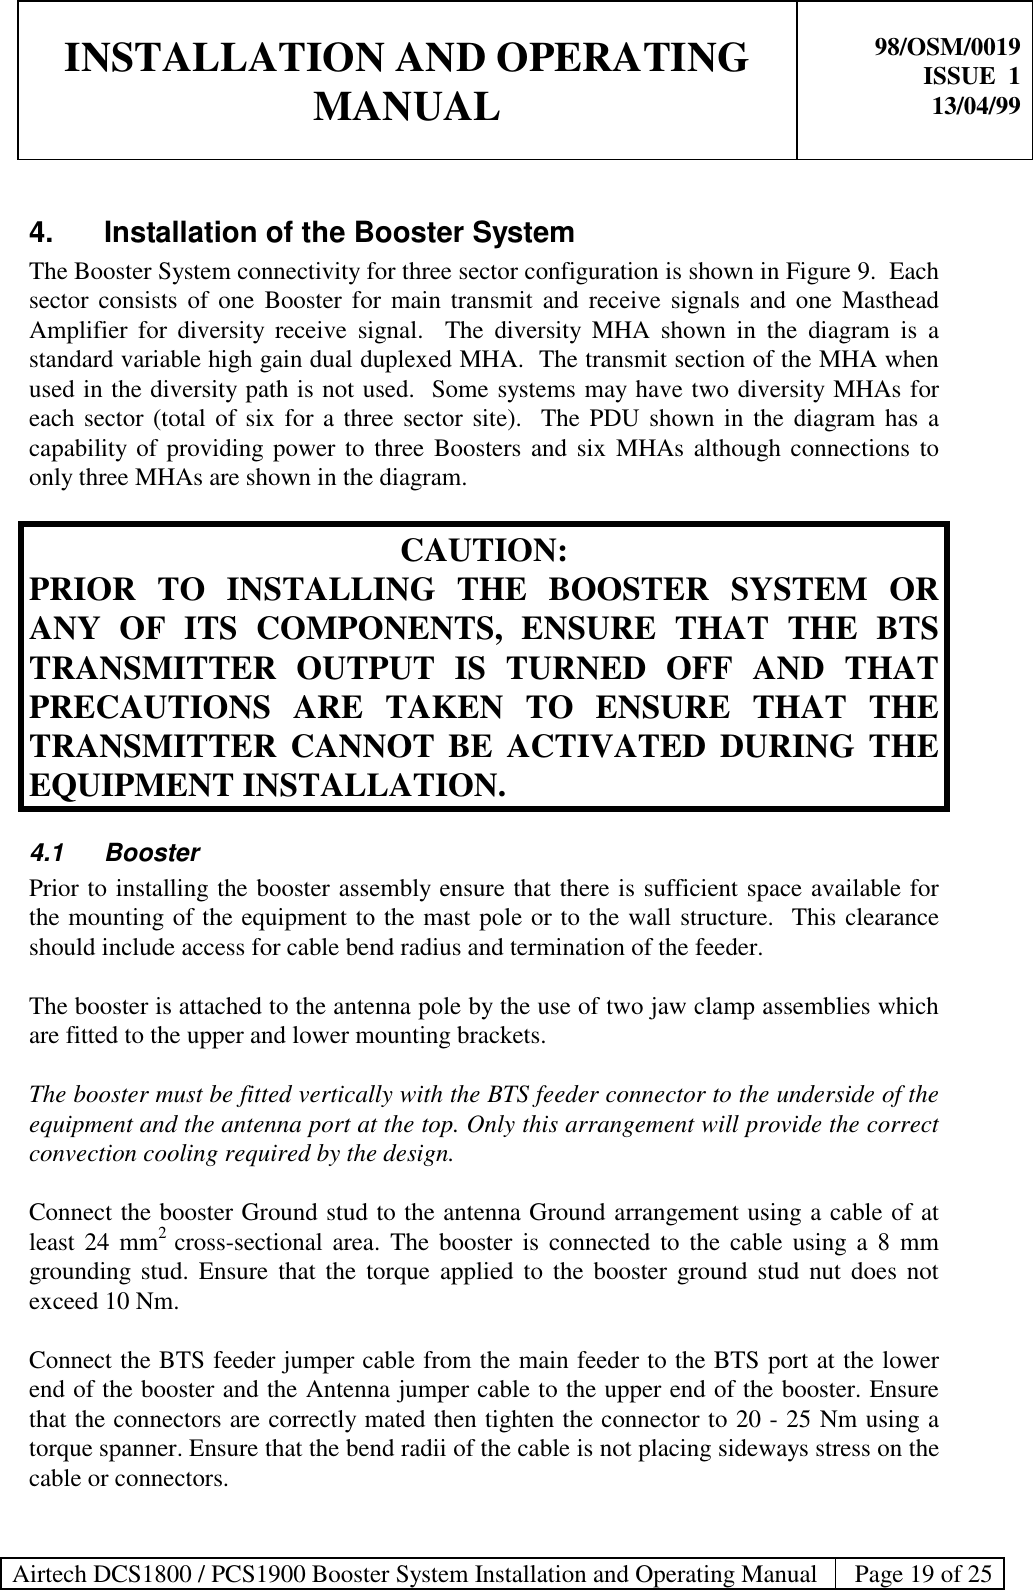 INSTALLATION AND OPERATINGMANUAL98/OSM/0019ISSUE  113/04/99Airtech DCS1800 / PCS1900 Booster System Installation and Operating Manual Page 19 of 254. Installation of the Booster SystemThe Booster System connectivity for three sector configuration is shown in Figure 9.  Eachsector consists of one Booster for main transmit and receive signals and one MastheadAmplifier for diversity receive signal.  The diversity MHA shown in the diagram is astandard variable high gain dual duplexed MHA.  The transmit section of the MHA whenused in the diversity path is not used.  Some systems may have two diversity MHAs foreach sector (total of six for a three sector site).  The PDU shown in the diagram has acapability of providing power to three Boosters and six MHAs although connections toonly three MHAs are shown in the diagram.CAUTION:PRIOR TO INSTALLING THE BOOSTER SYSTEM ORANY OF ITS COMPONENTS, ENSURE THAT THE BTSTRANSMITTER OUTPUT IS TURNED OFF AND THATPRECAUTIONS ARE TAKEN TO ENSURE THAT THETRANSMITTER CANNOT BE ACTIVATED DURING THEEQUIPMENT INSTALLATION.4.1 BoosterPrior to installing the booster assembly ensure that there is sufficient space available forthe mounting of the equipment to the mast pole or to the wall structure.  This clearanceshould include access for cable bend radius and termination of the feeder.The booster is attached to the antenna pole by the use of two jaw clamp assemblies whichare fitted to the upper and lower mounting brackets.The booster must be fitted vertically with the BTS feeder connector to the underside of theequipment and the antenna port at the top. Only this arrangement will provide the correctconvection cooling required by the design.Connect the booster Ground stud to the antenna Ground arrangement using a cable of atleast 24 mm2  cross-sectional area. The booster is connected to the cable using a 8 mmgrounding stud. Ensure that the torque applied to the booster ground stud nut does notexceed 10 Nm.Connect the BTS feeder jumper cable from the main feeder to the BTS port at the lowerend of the booster and the Antenna jumper cable to the upper end of the booster. Ensurethat the connectors are correctly mated then tighten the connector to 20 - 25 Nm using atorque spanner. Ensure that the bend radii of the cable is not placing sideways stress on thecable or connectors.